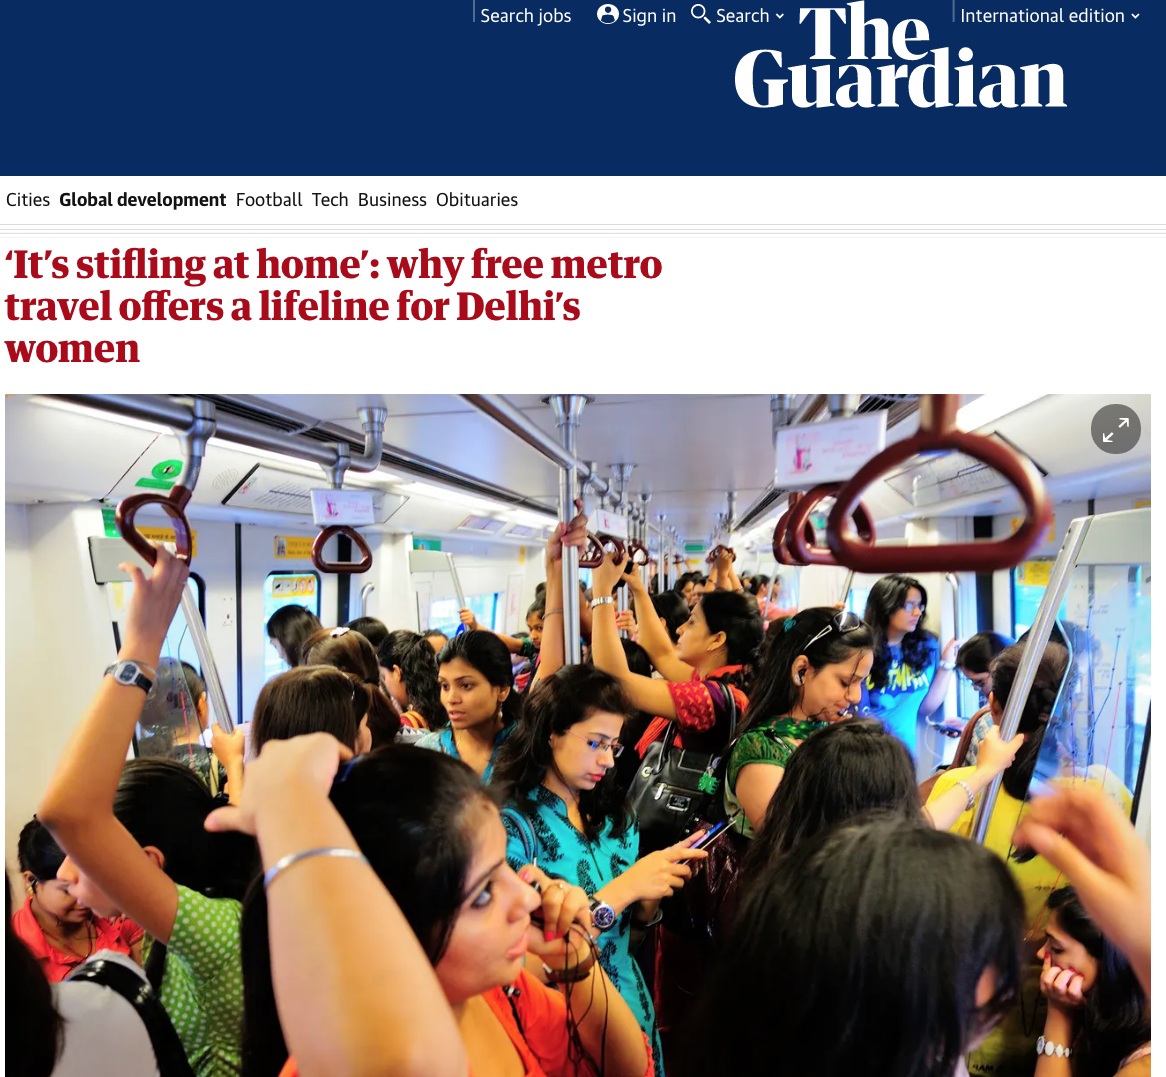 The Guardian, 2019